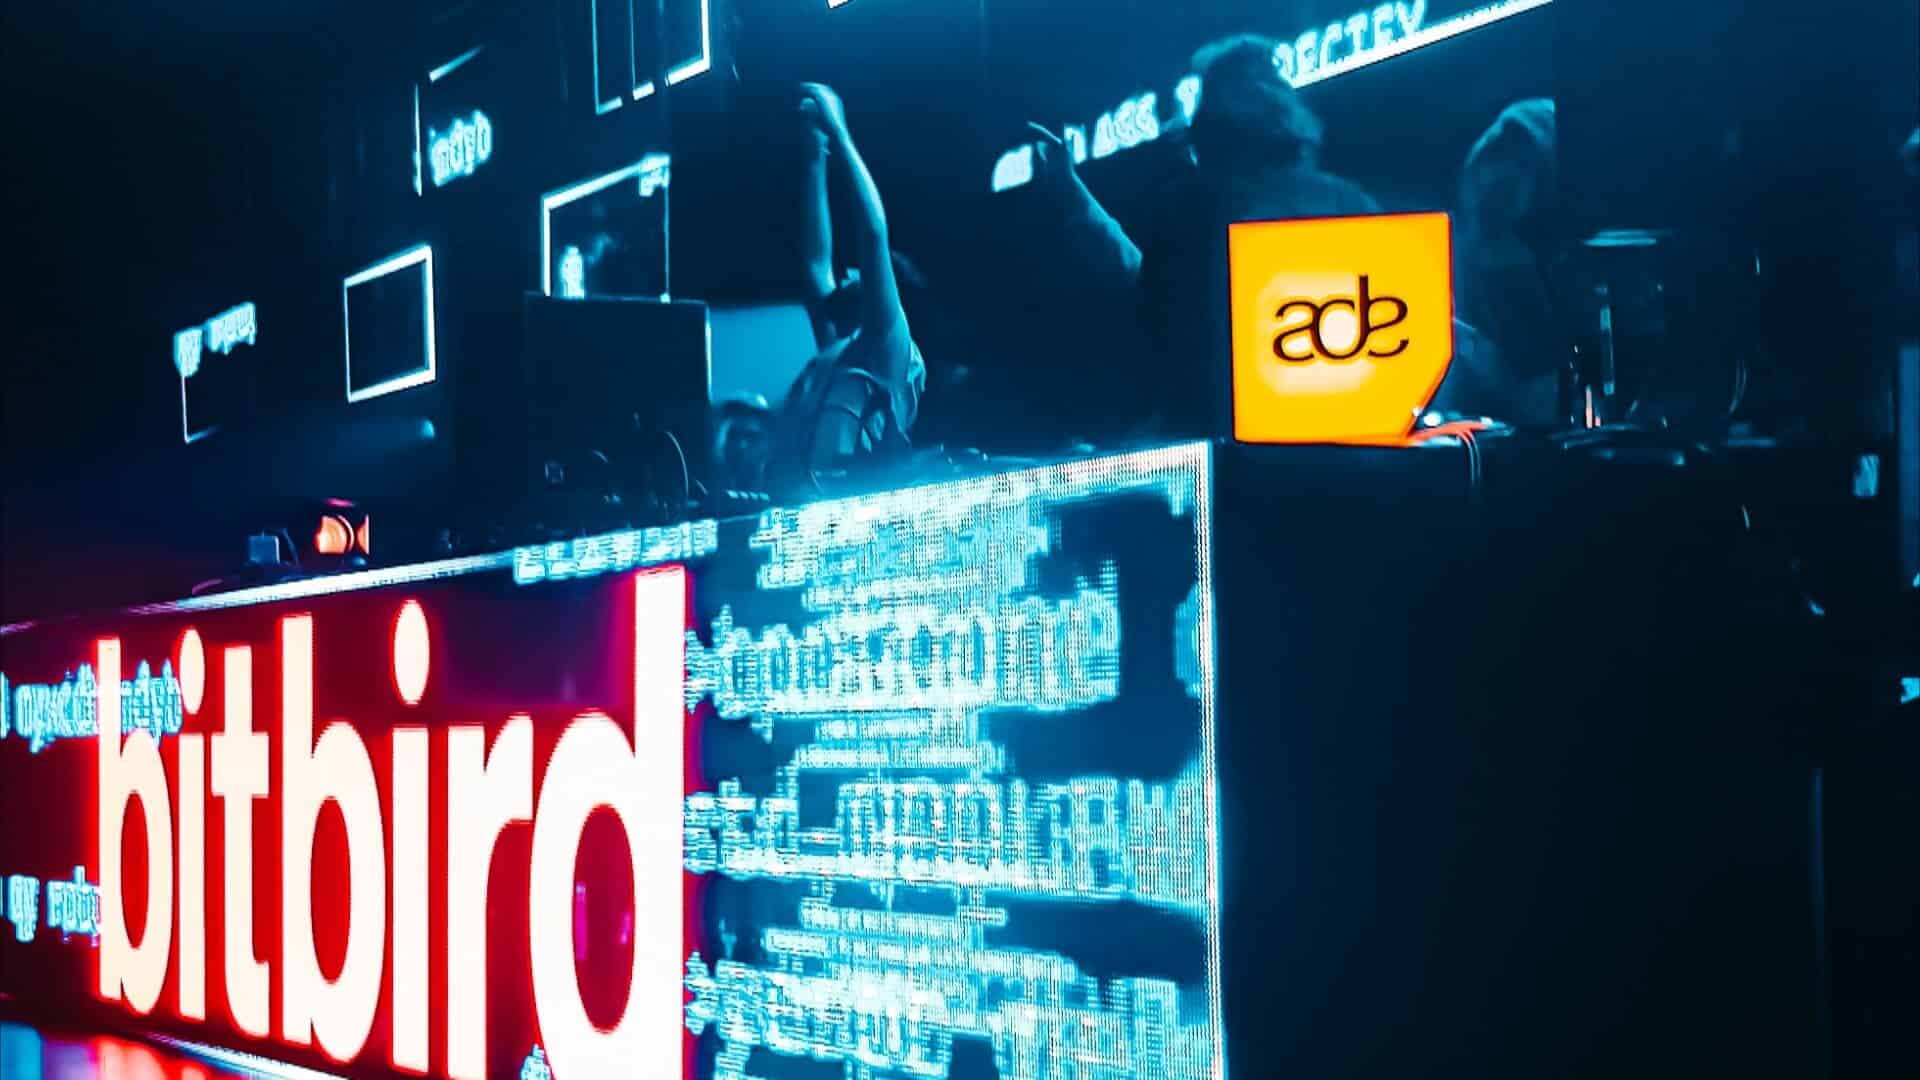 The Amsterdam Dance Event ADE